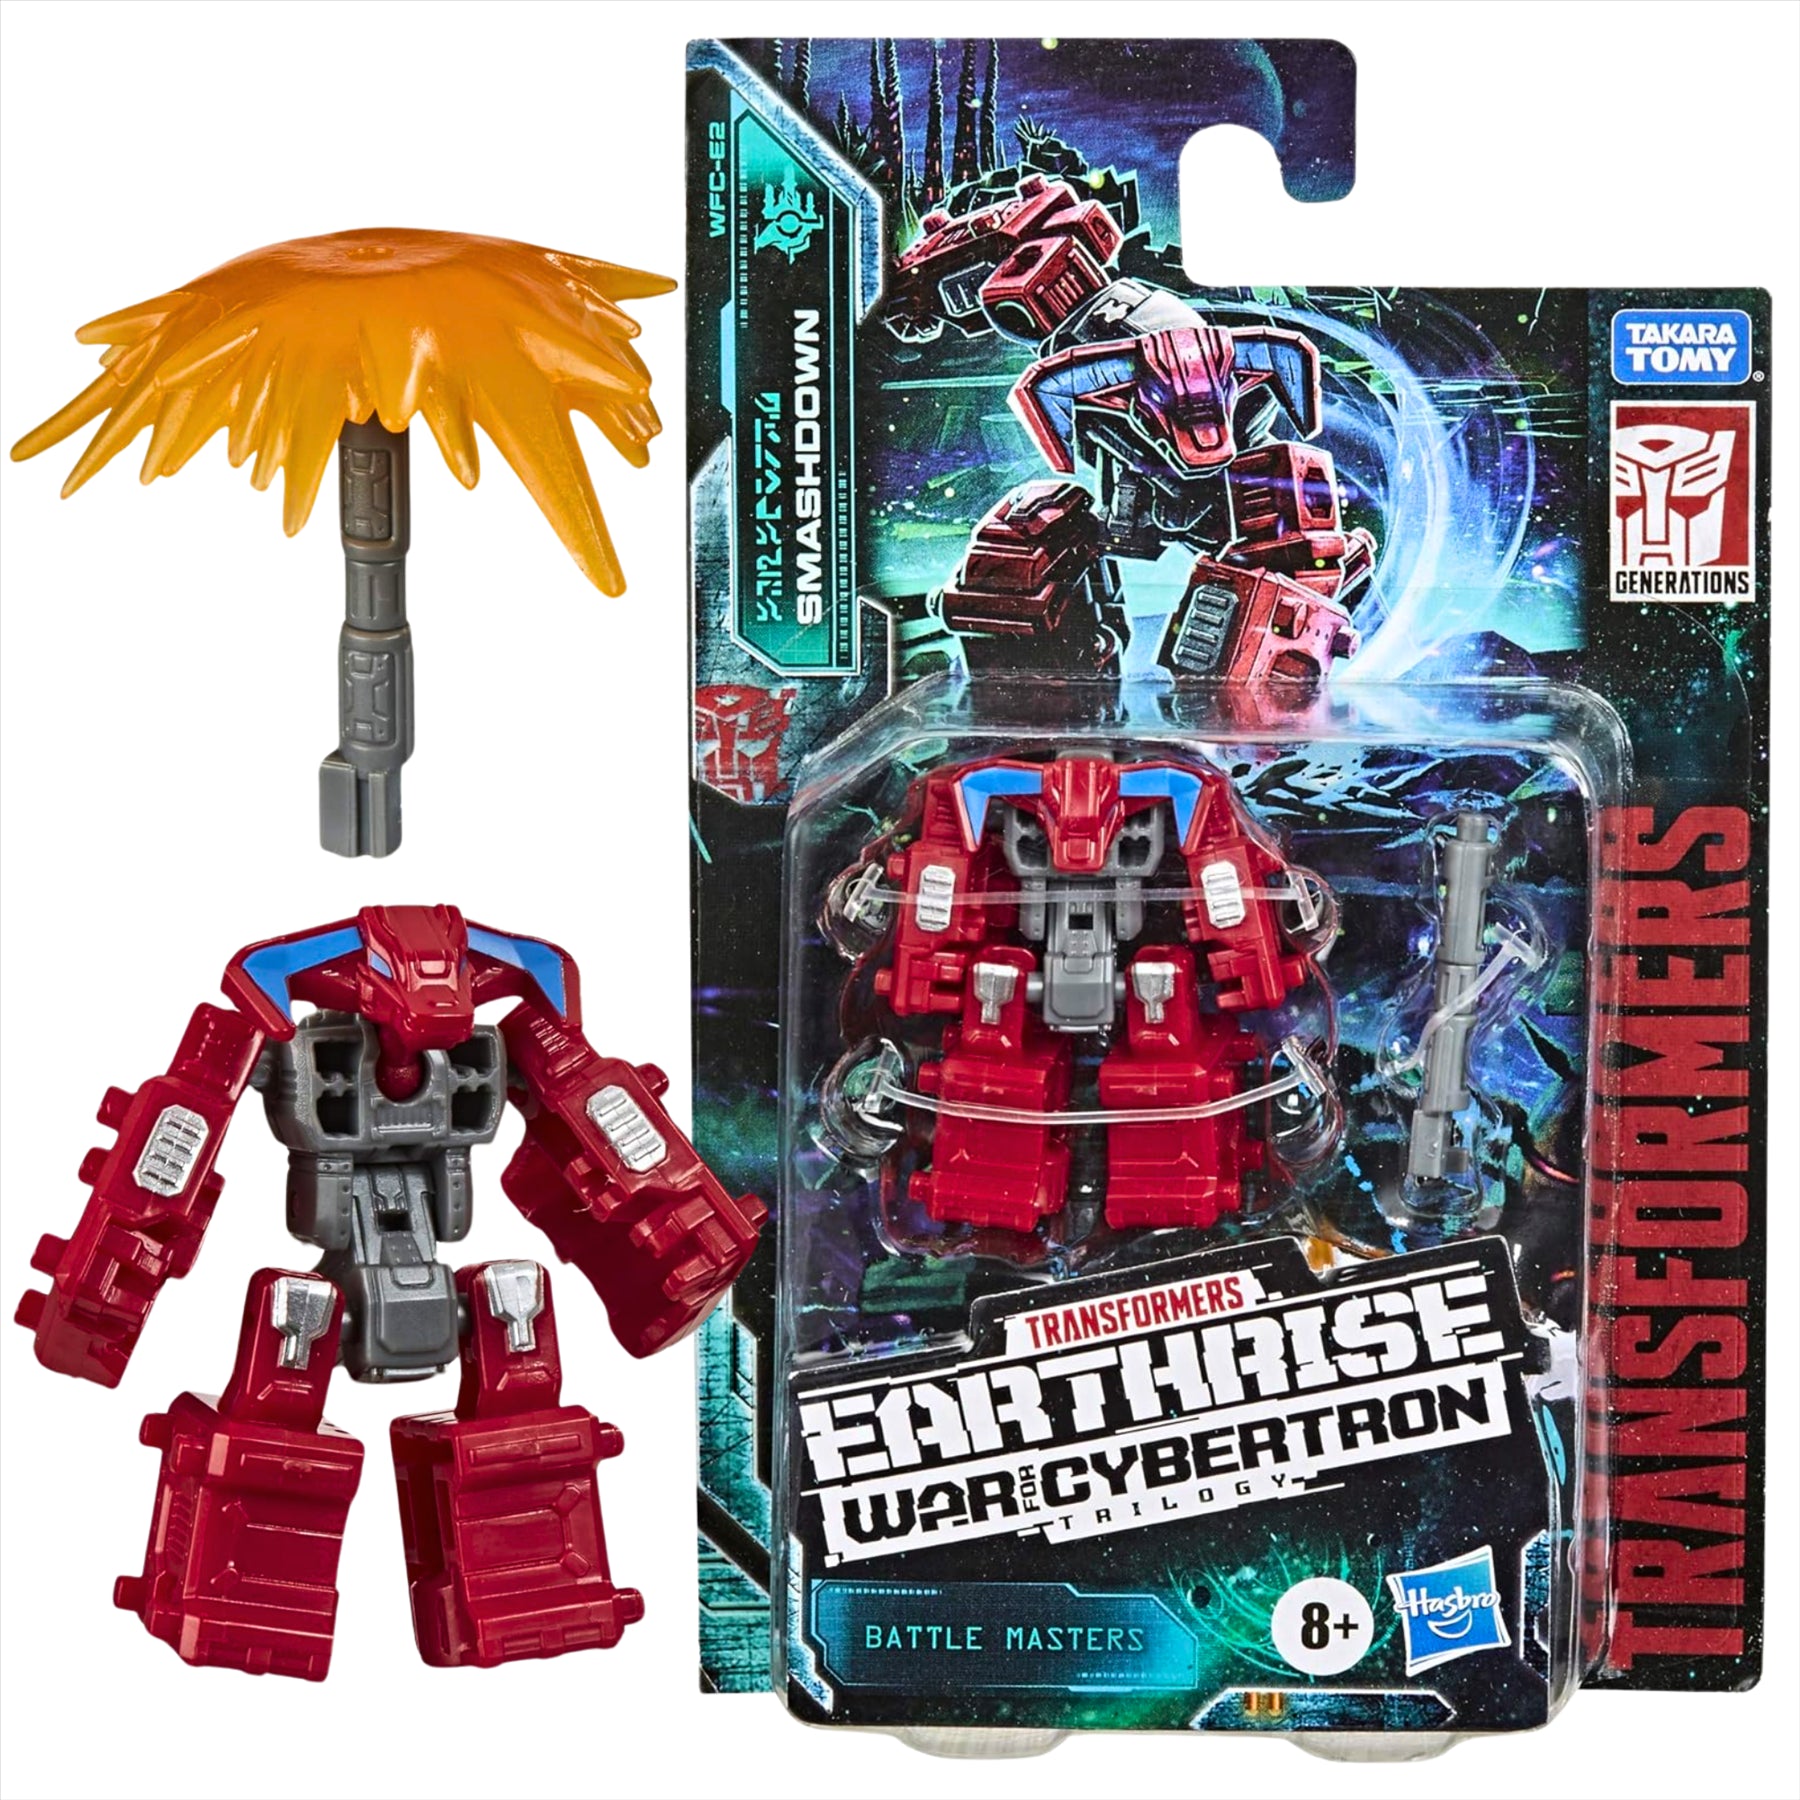 Transformers Earthrise War for Cybertron Smashdown 5cm Articulated Action Figure Toy with Accessory - Toptoys2u